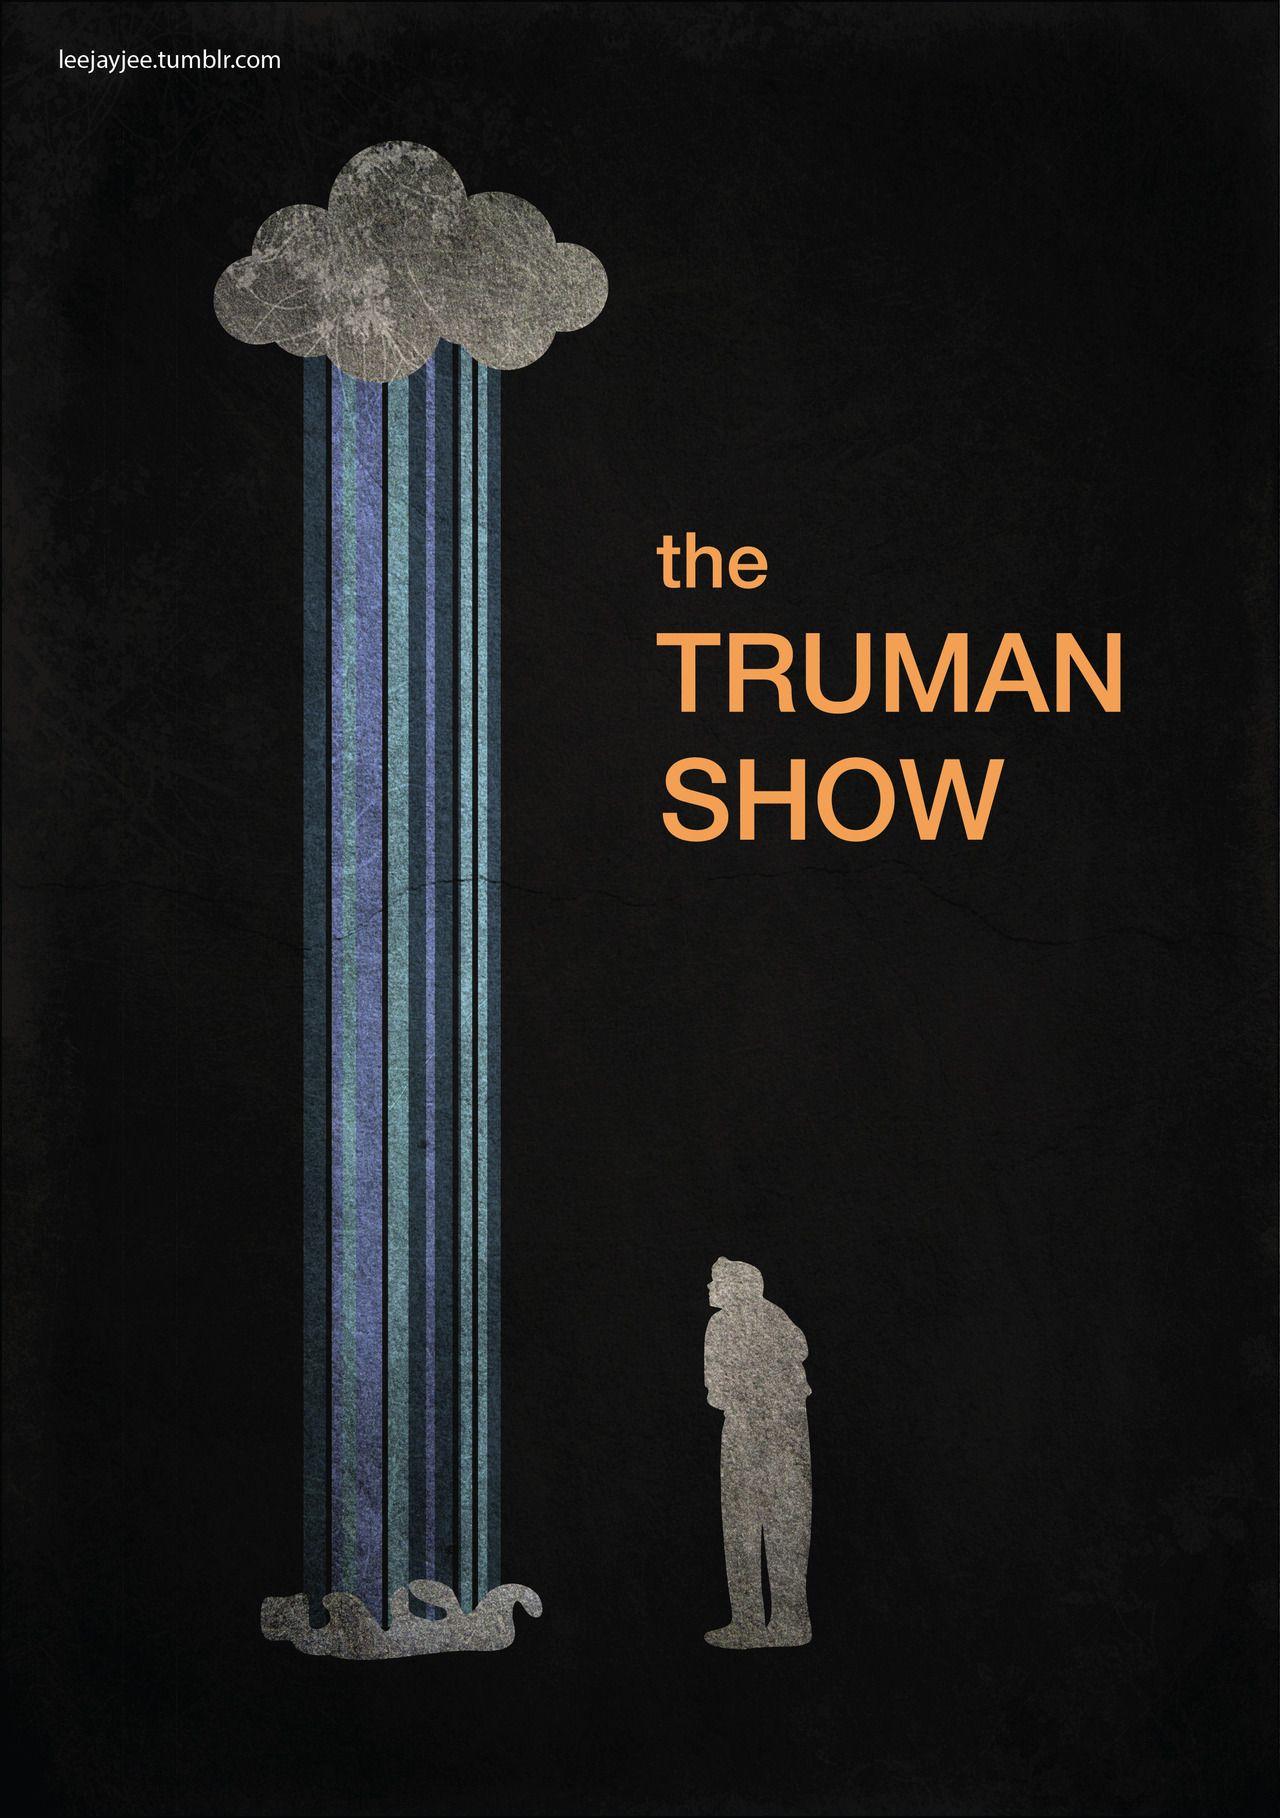 The Truman Show Movie Poster. movies. Movie posters, Film posters